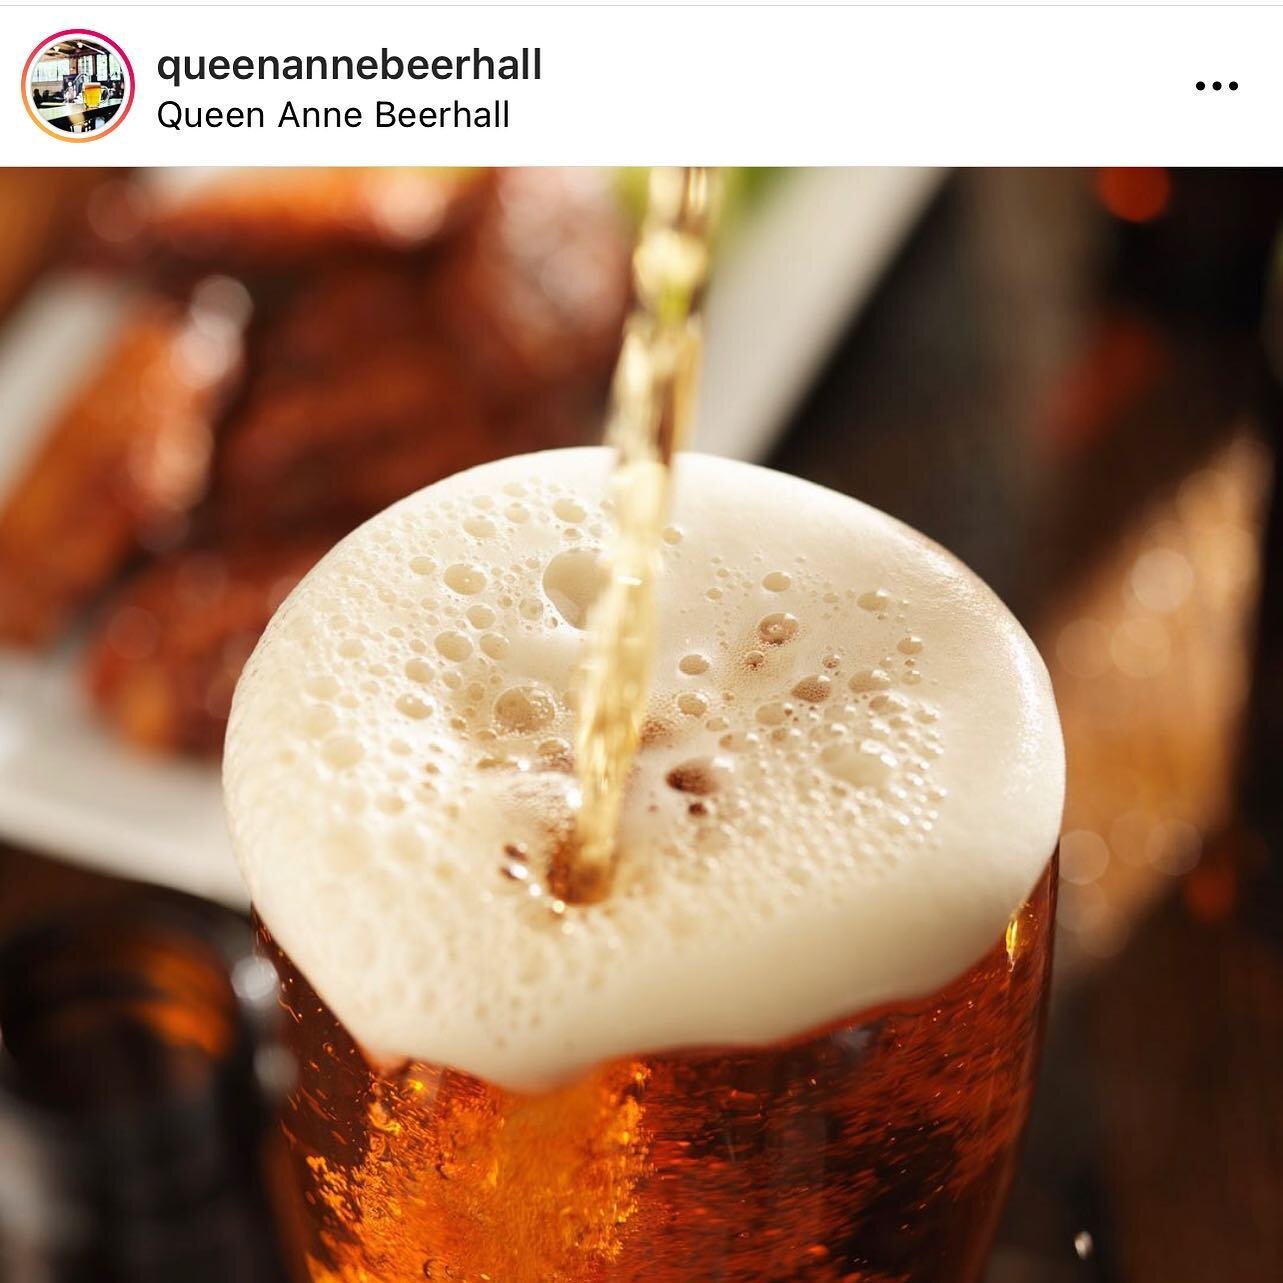 Featured Events for Today 5/18

The best of Belgium at @queenannebeerhall 

Brewers Bocce at @rheinhausseattle 

#seattlebeerscene #seattlebeerweek #seattle #sbw13